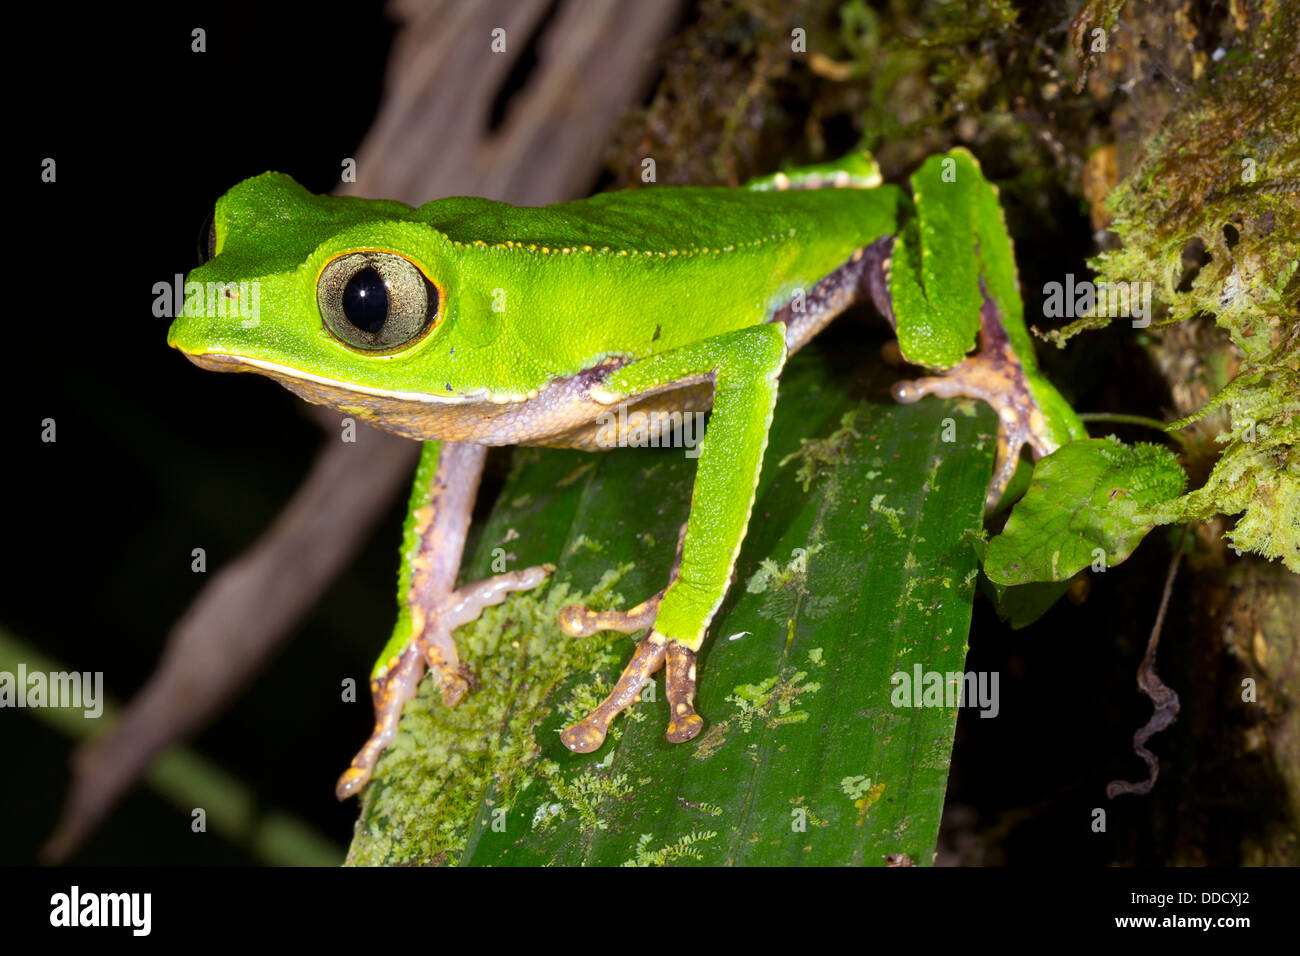 White-lined Monkey Frog (Phyllomedusa vaillanti) Male in calling position on a leaf at night in tropical rainforest, Ecuador Stock Photo